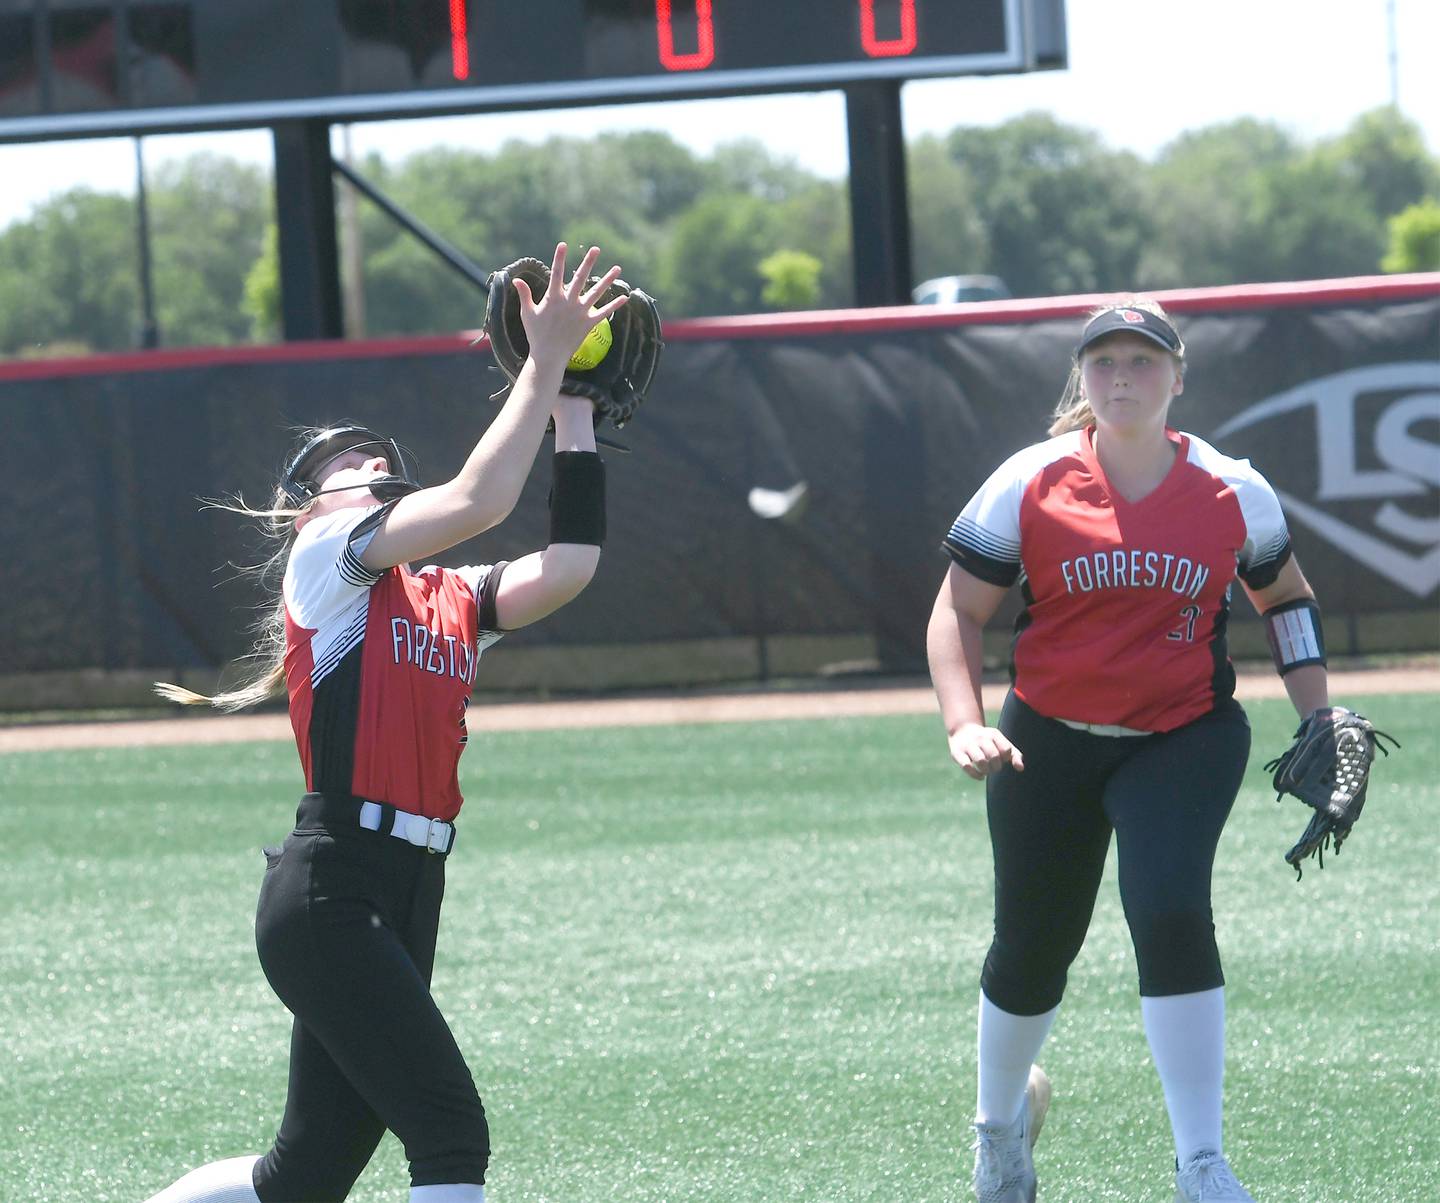 Forreston second baseman Alaina Miller catches a fly ball as right fielder Aubrey Sanders watches during action against Casey-Westfield in the 1A semifinal game on Friday, June 3 in Peoria.